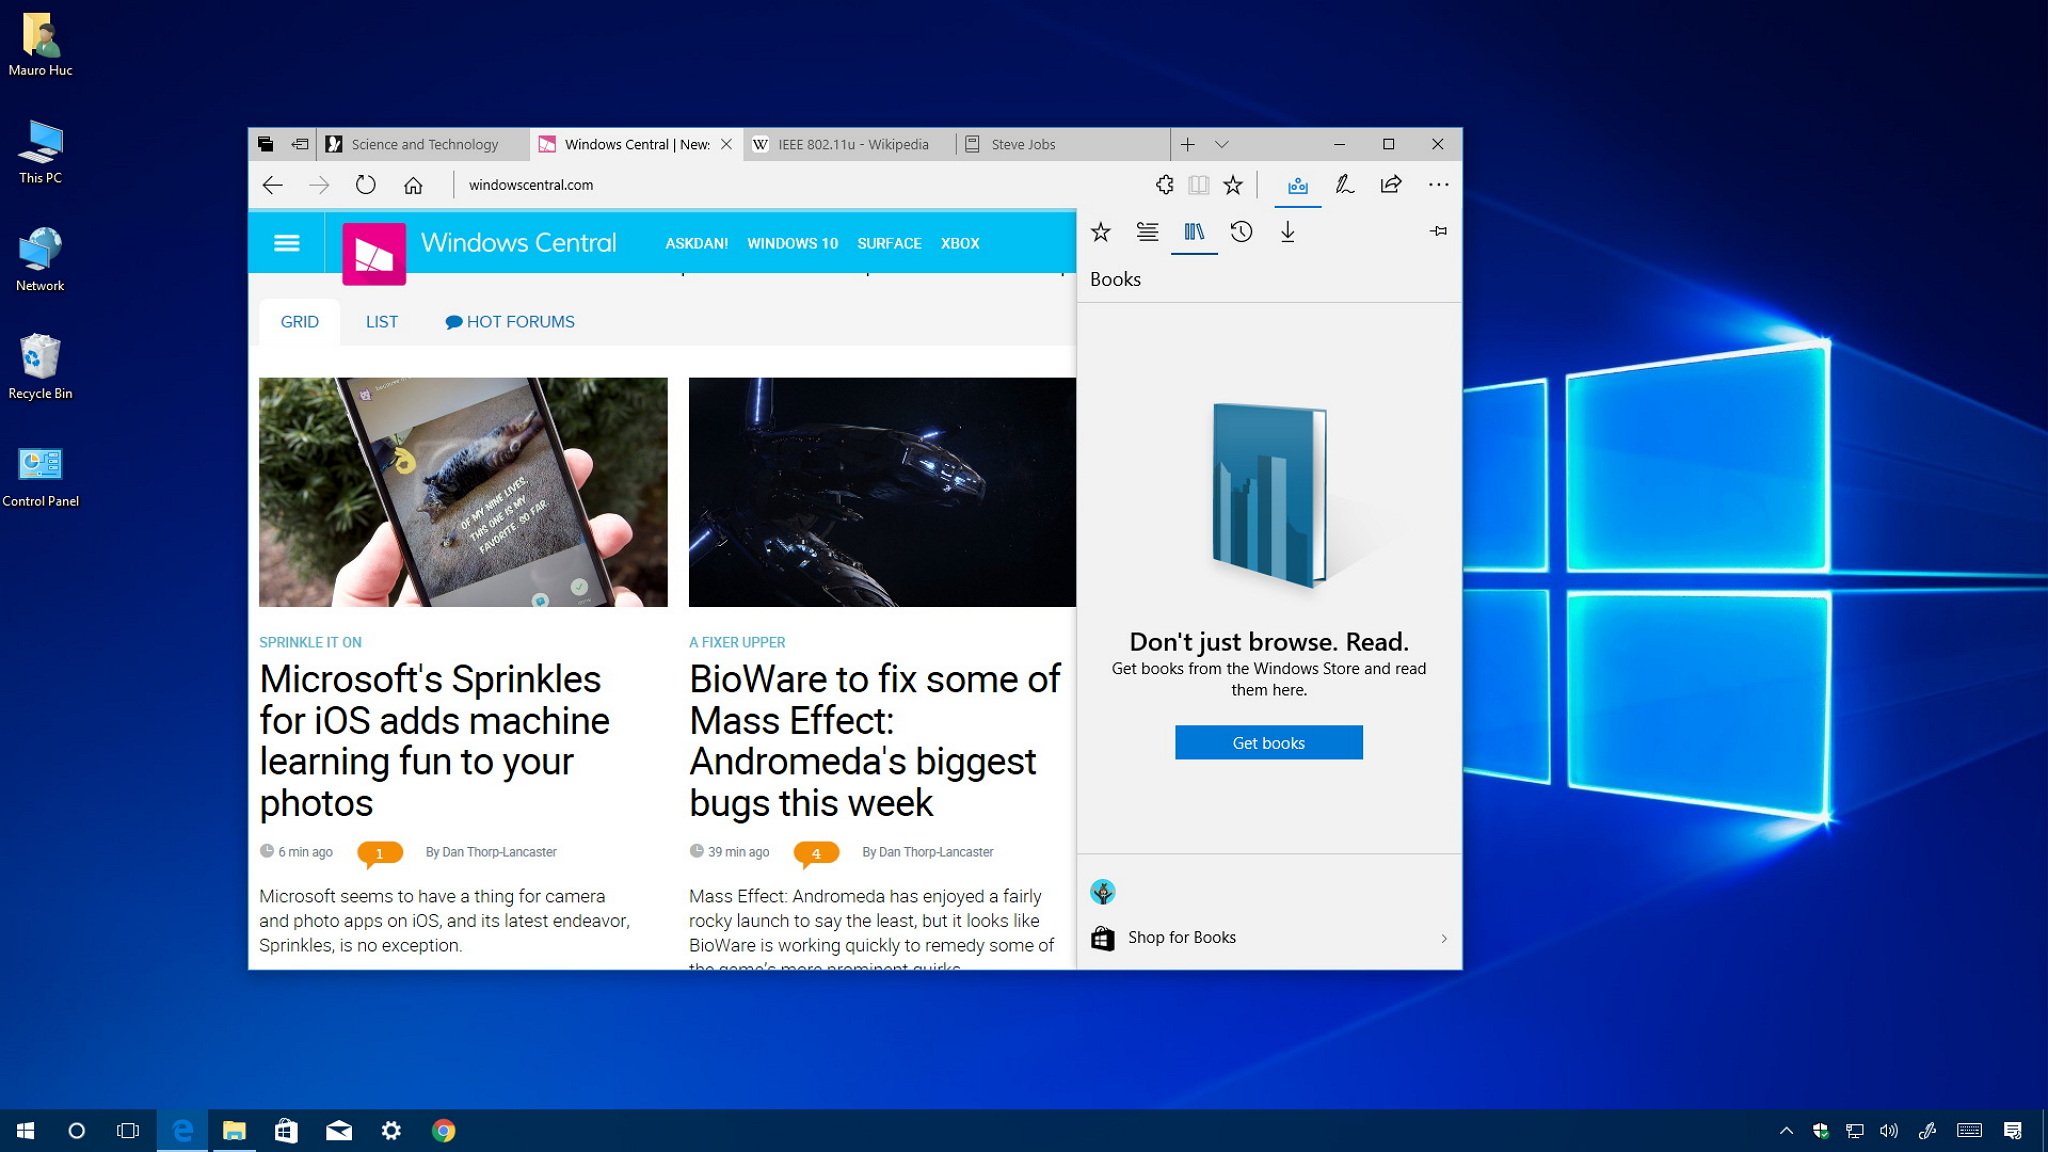 What's new with Microsoft Edge for the Windows 10 Creators Update